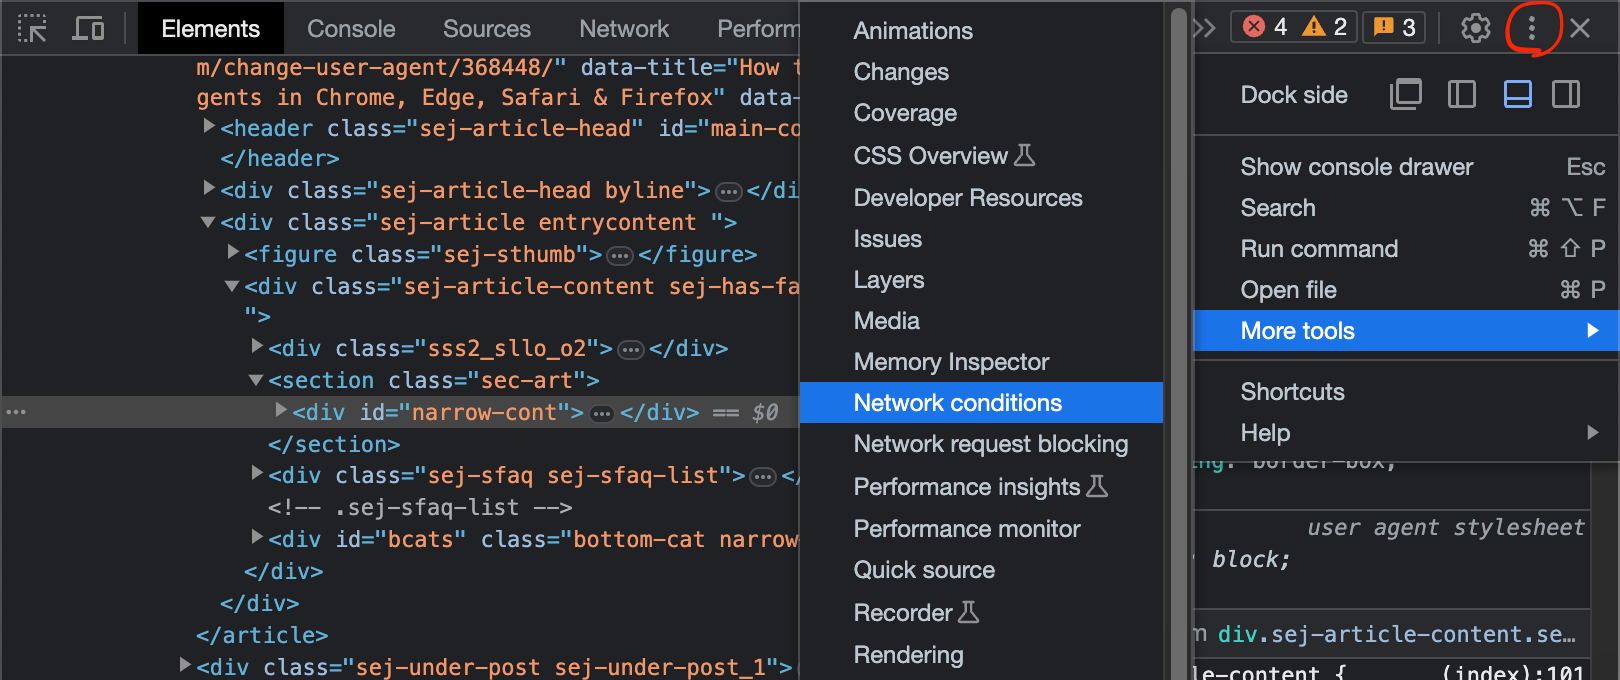 Screenshot of the devtools menu to get 'Network conditions'.